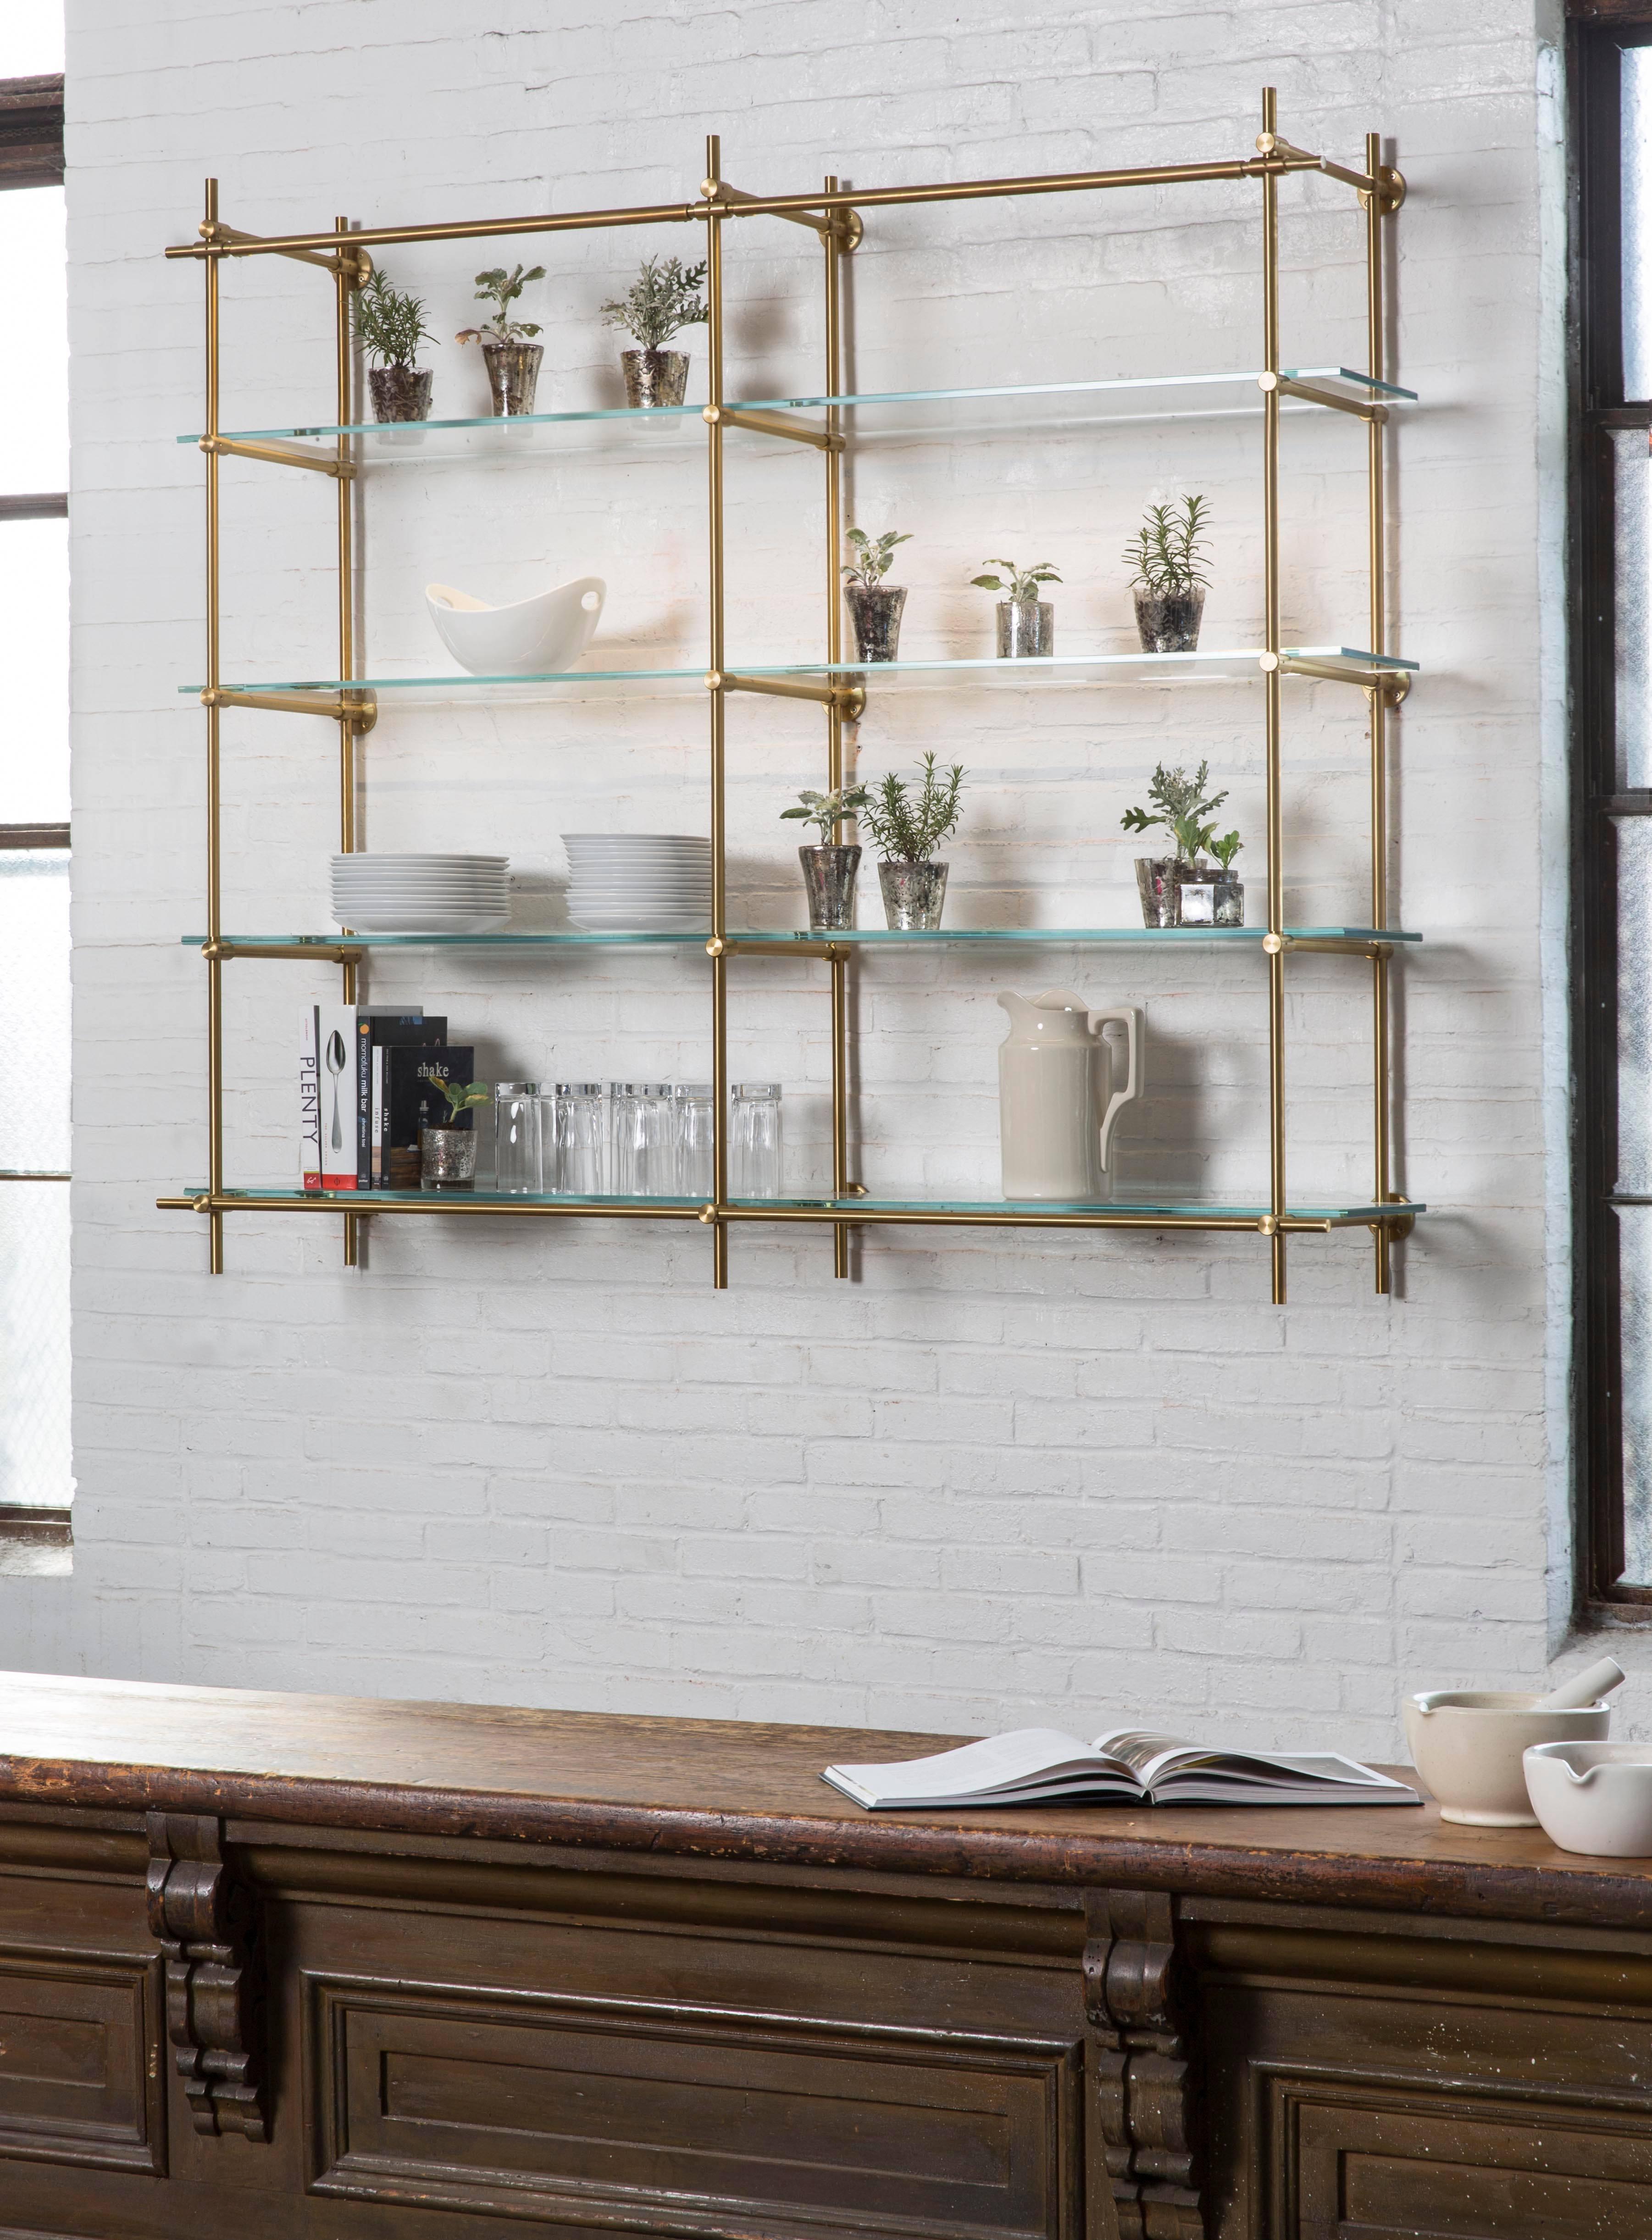 This two bay hanging shelving unit is part of Amuneal’s Collector’s Shelving System and features our precision machined brass fittings and tubes in a hand applied warm brass finish. The upper horizontal tube contains integral LED lighting to